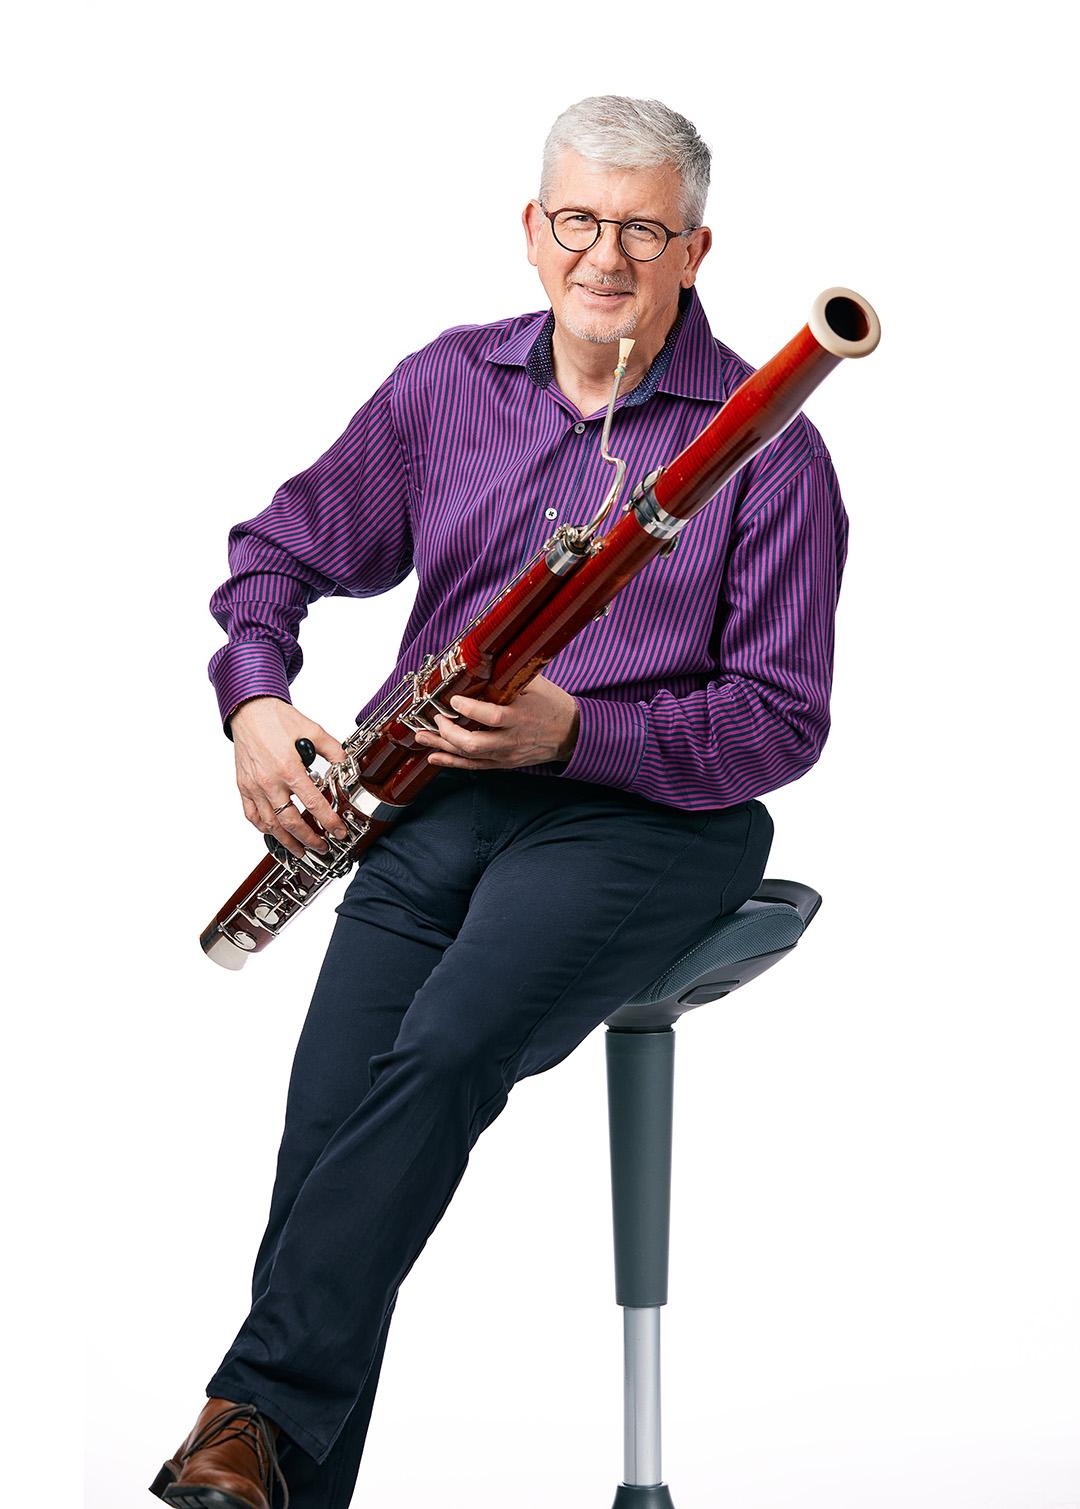 Paul Rafanelli looking friendly and cool, sitting on a stool holding a bassoon